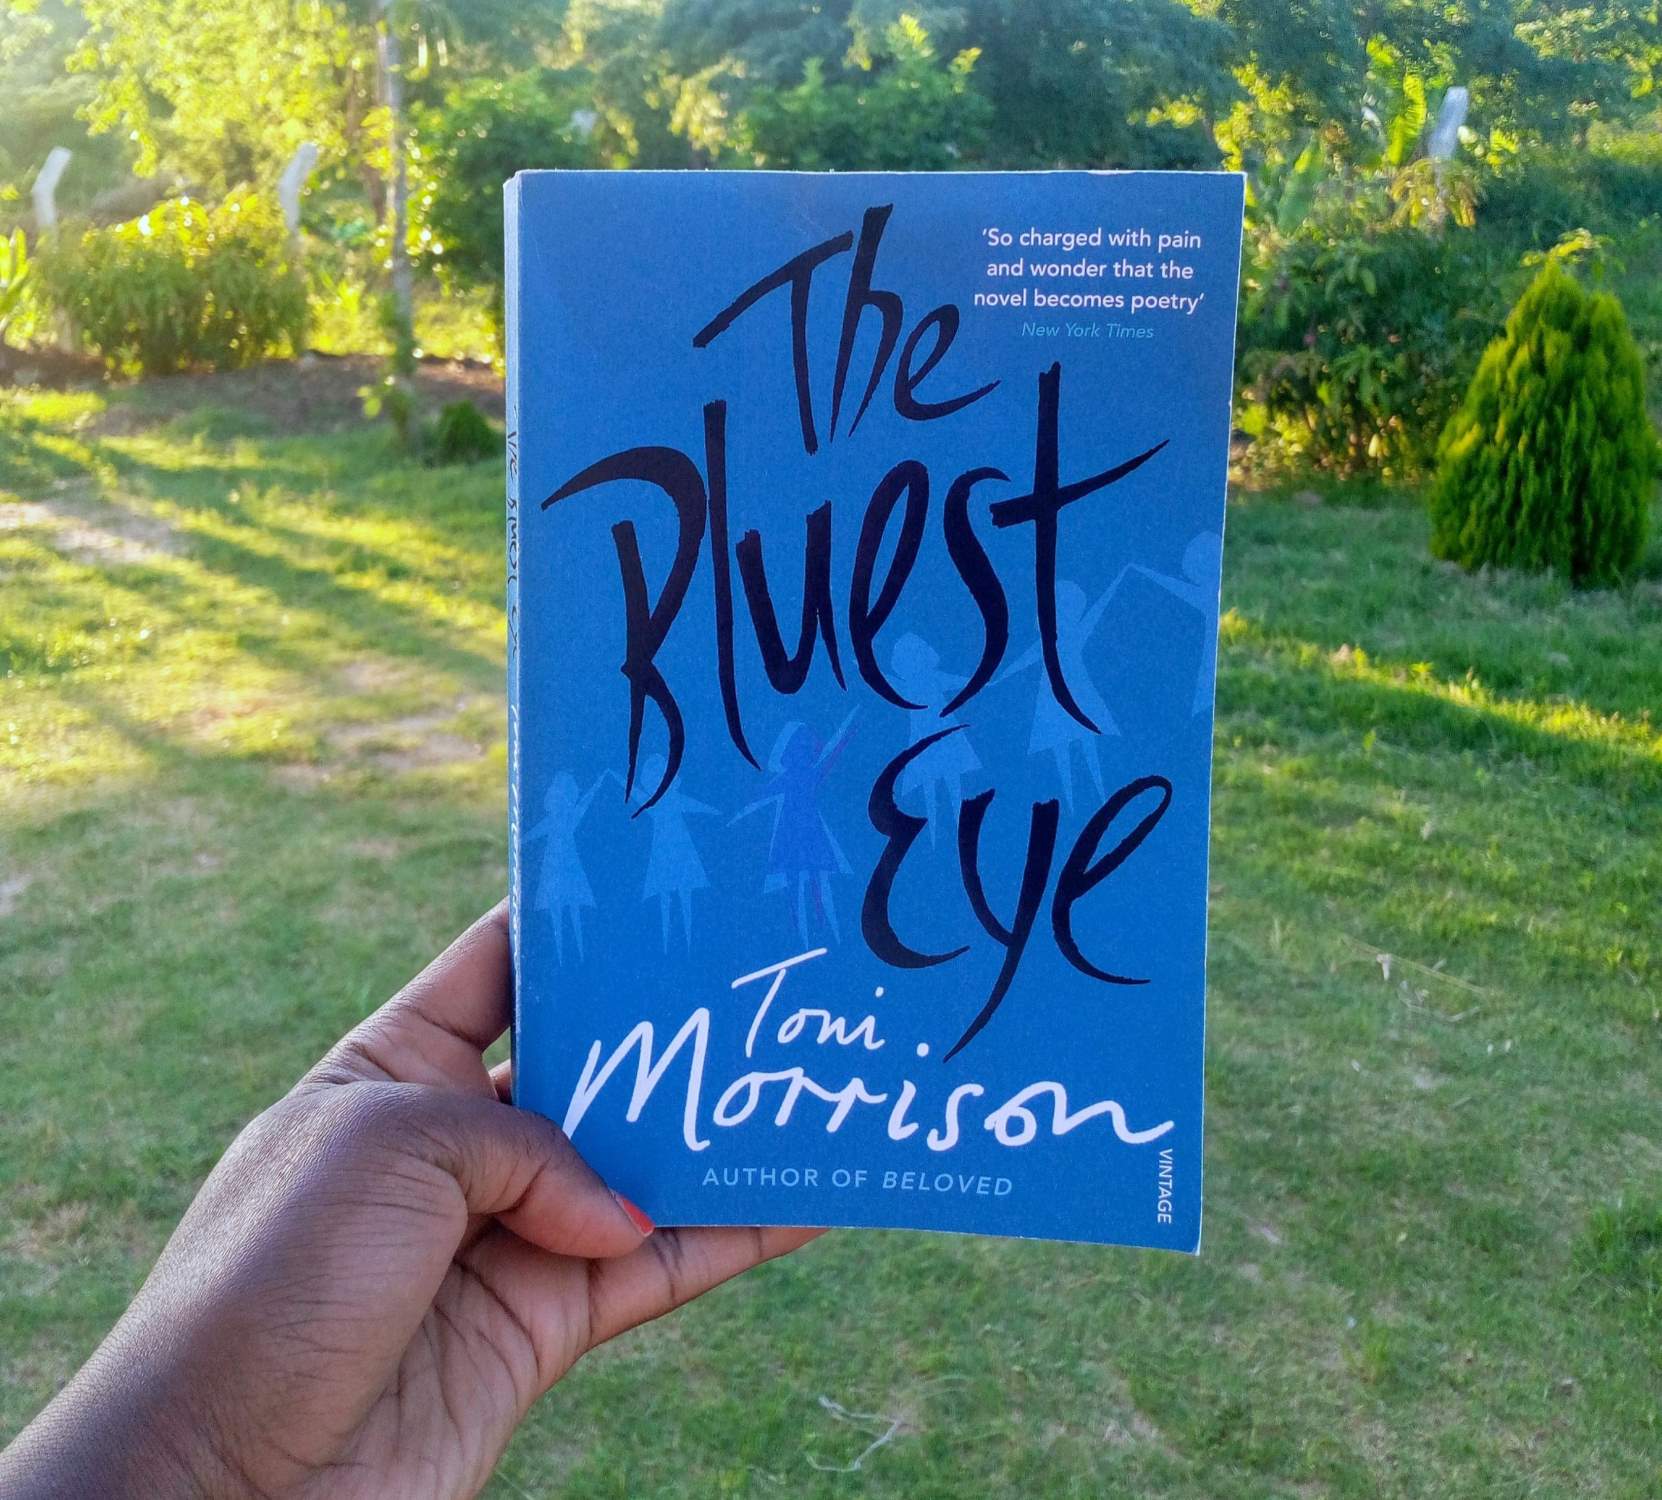 9-captivating-facts-about-the-bluest-eye-toni-morrison